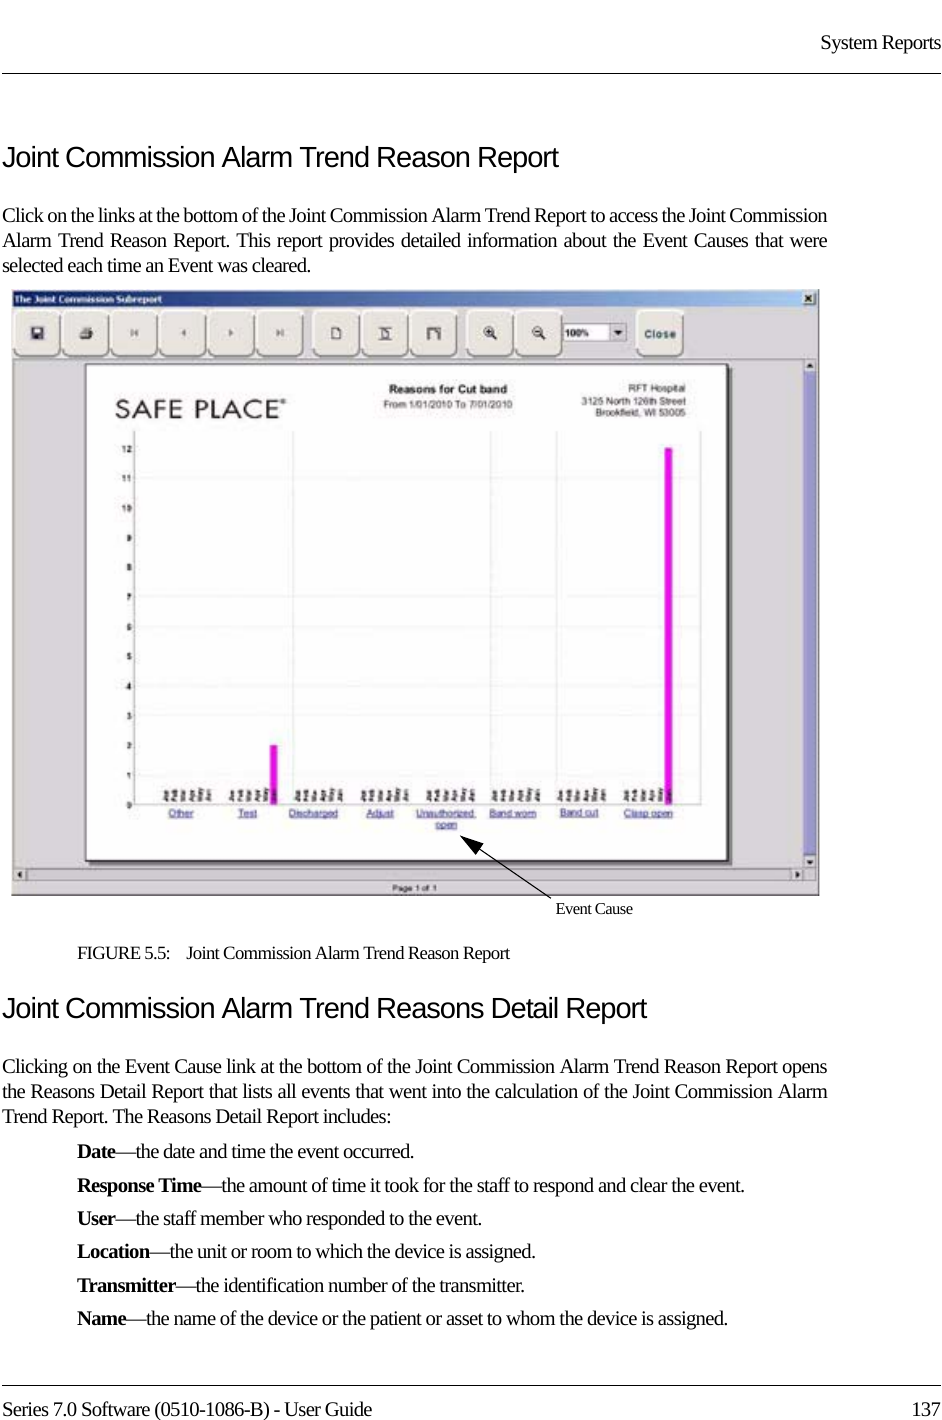 Series 7.0 Software (0510-1086-B) - User Guide  137System ReportsJoint Commission Alarm Trend Reason ReportClick on the links at the bottom of the Joint Commission Alarm Trend Report to access the Joint Commission Alarm Trend Reason Report. This report provides detailed information about the Event Causes that were selected each time an Event was cleared.FIGURE 5.5:    Joint Commission Alarm Trend Reason ReportJoint Commission Alarm Trend Reasons Detail ReportClicking on the Event Cause link at the bottom of the Joint Commission Alarm Trend Reason Report opens the Reasons Detail Report that lists all events that went into the calculation of the Joint Commission Alarm Trend Report. The Reasons Detail Report includes:Date—the date and time the event occurred.Response Time—the amount of time it took for the staff to respond and clear the event.User—the staff member who responded to the event. Location—the unit or room to which the device is assigned.Transmitter—the identification number of the transmitter.Name—the name of the device or the patient or asset to whom the device is assigned.Event Cause